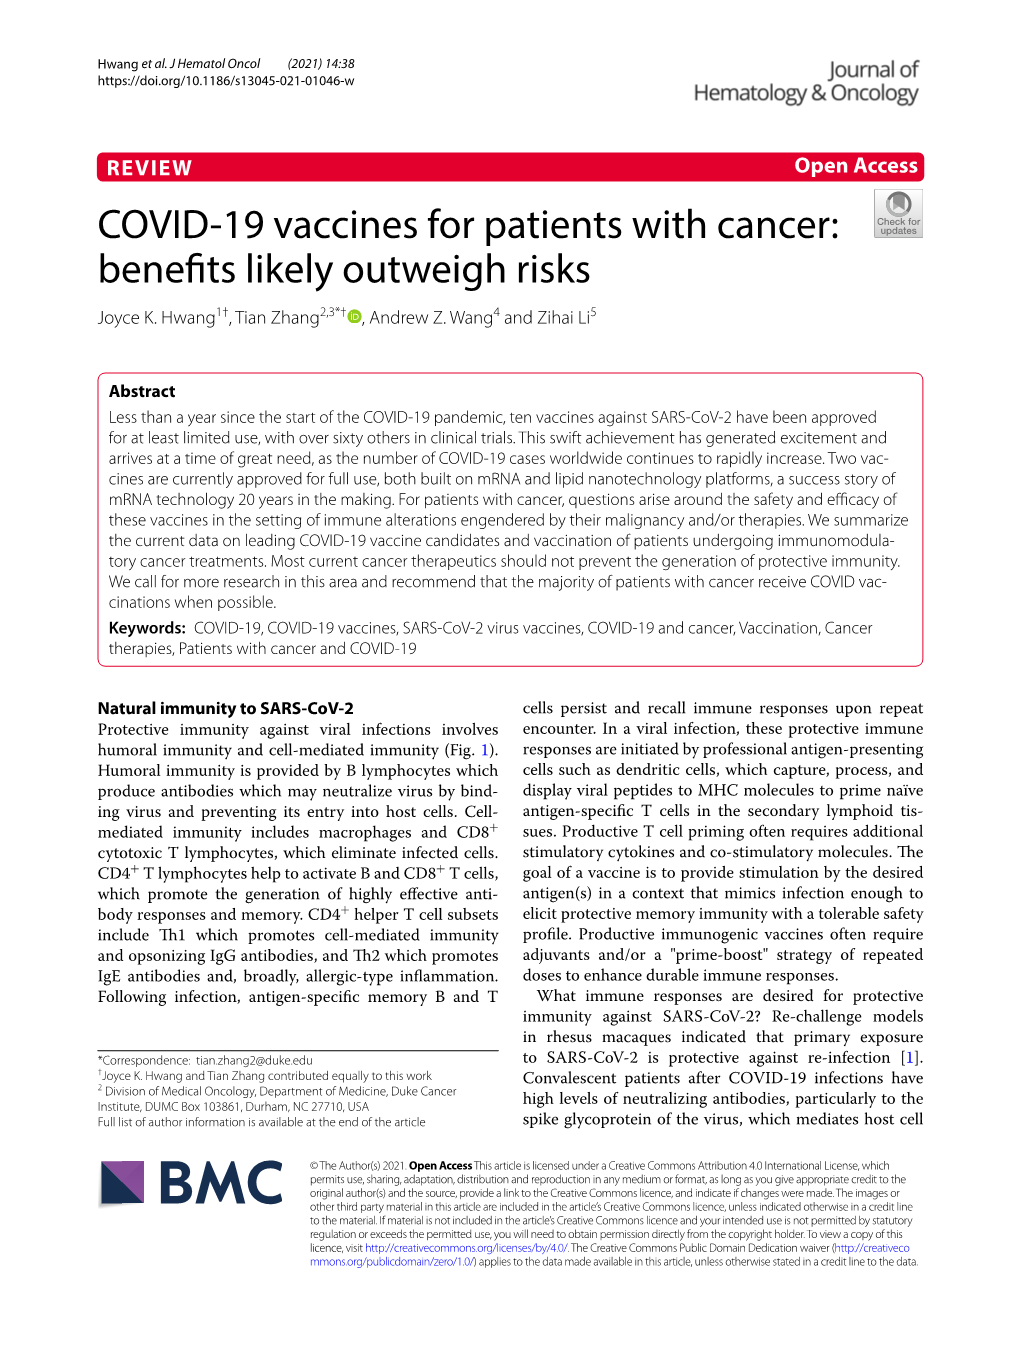 COVID-19 Vaccines for Patients with Cancer: Benefits Likely Outweigh Risks